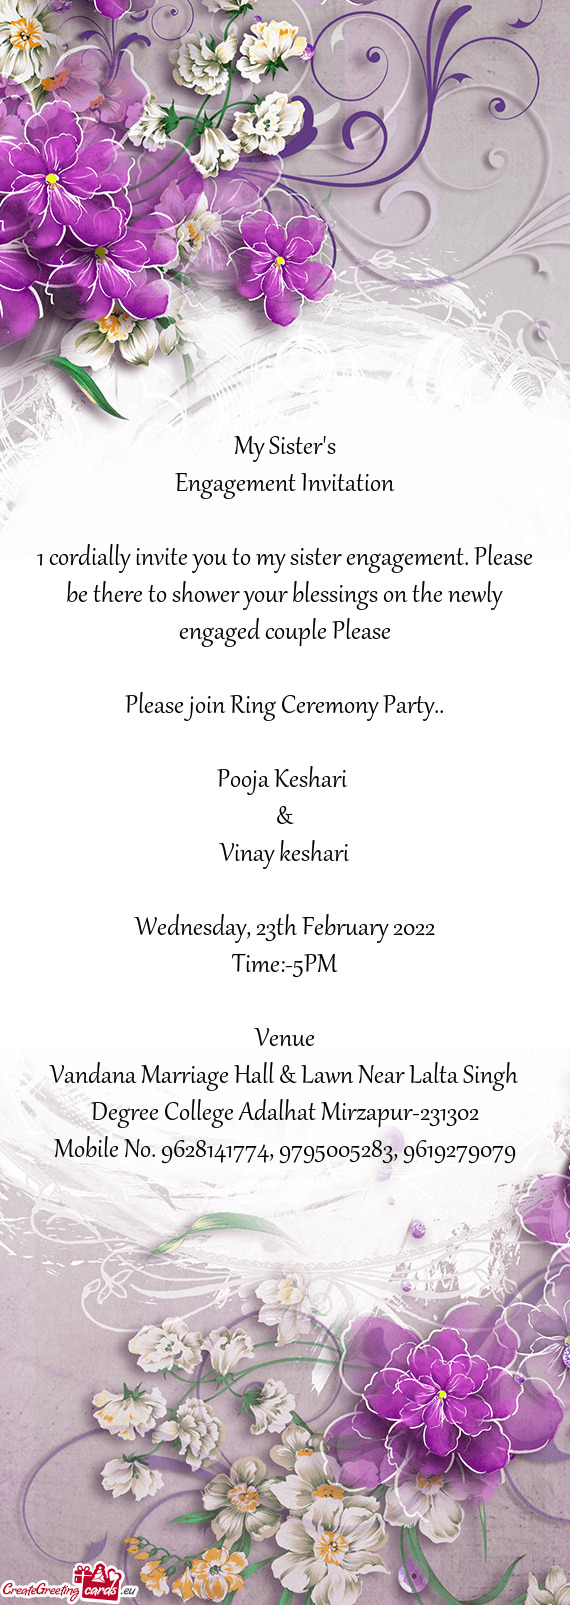 1 cordially invite you to my sister engagement. Please be there to shower your blessings on the newl